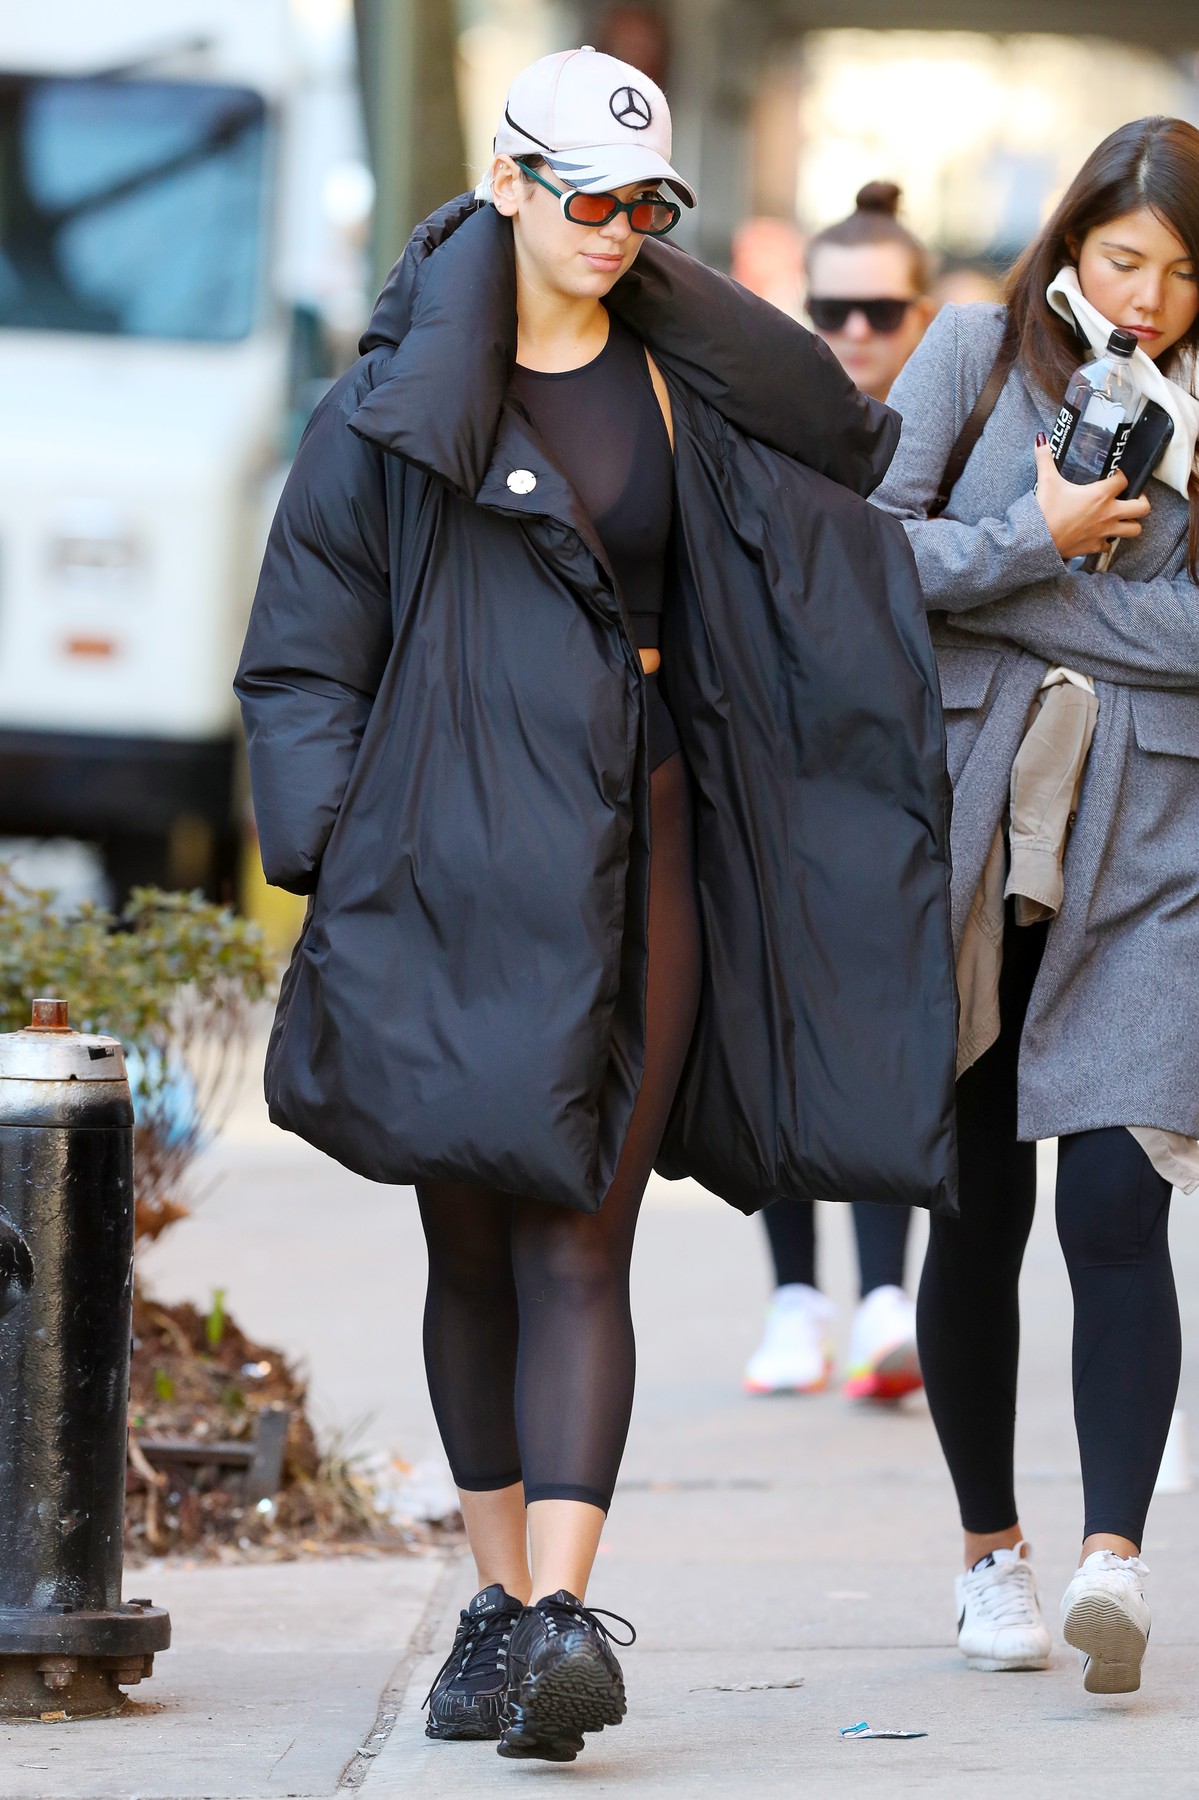 02/19/2020 Dua Lipa is pictured leaving a hot yoga class in New York City. The 24 year old English singer wore a Mercedes baseball cap, puffer jacket, semi-sheer athletic top, matching leggings, and sneakers., Image: 499649827, License: Rights-managed, Restrictions: NO usage without agreed price and terms. Please contact sales@theimagedirect.com, Model Release: no, Credit line: TheImageDirect.com / The Image Direct / Profimedia